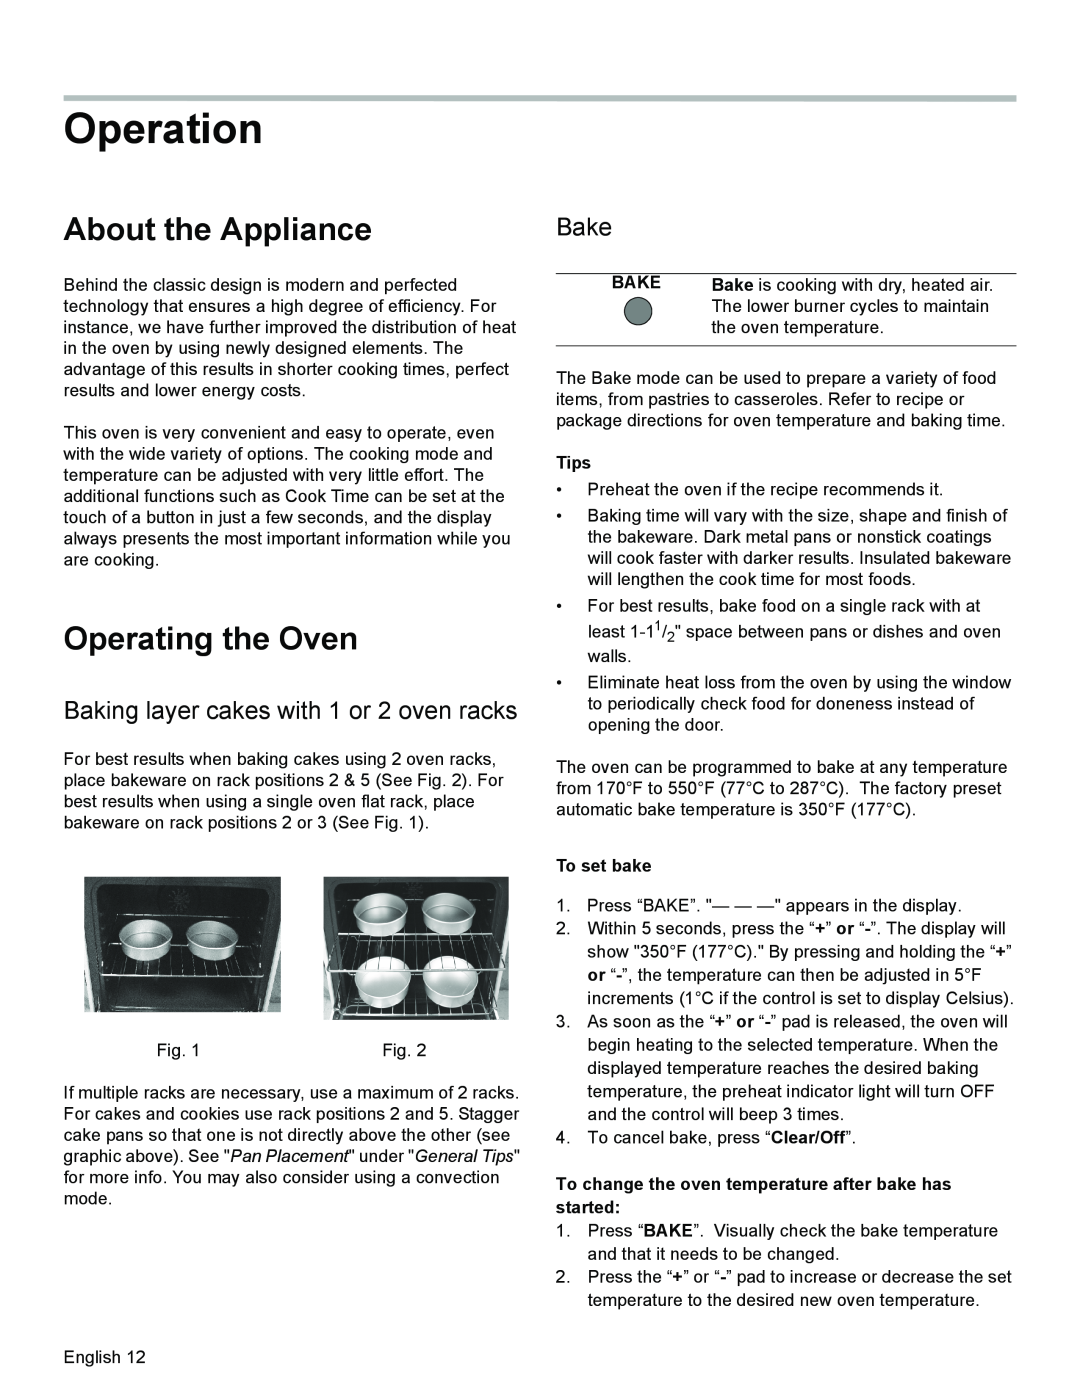 Bosch Appliances HGS3023UC Operation, About the Appliance, Operating the Oven, Baking layer cakes with 1 or 2 oven racks 